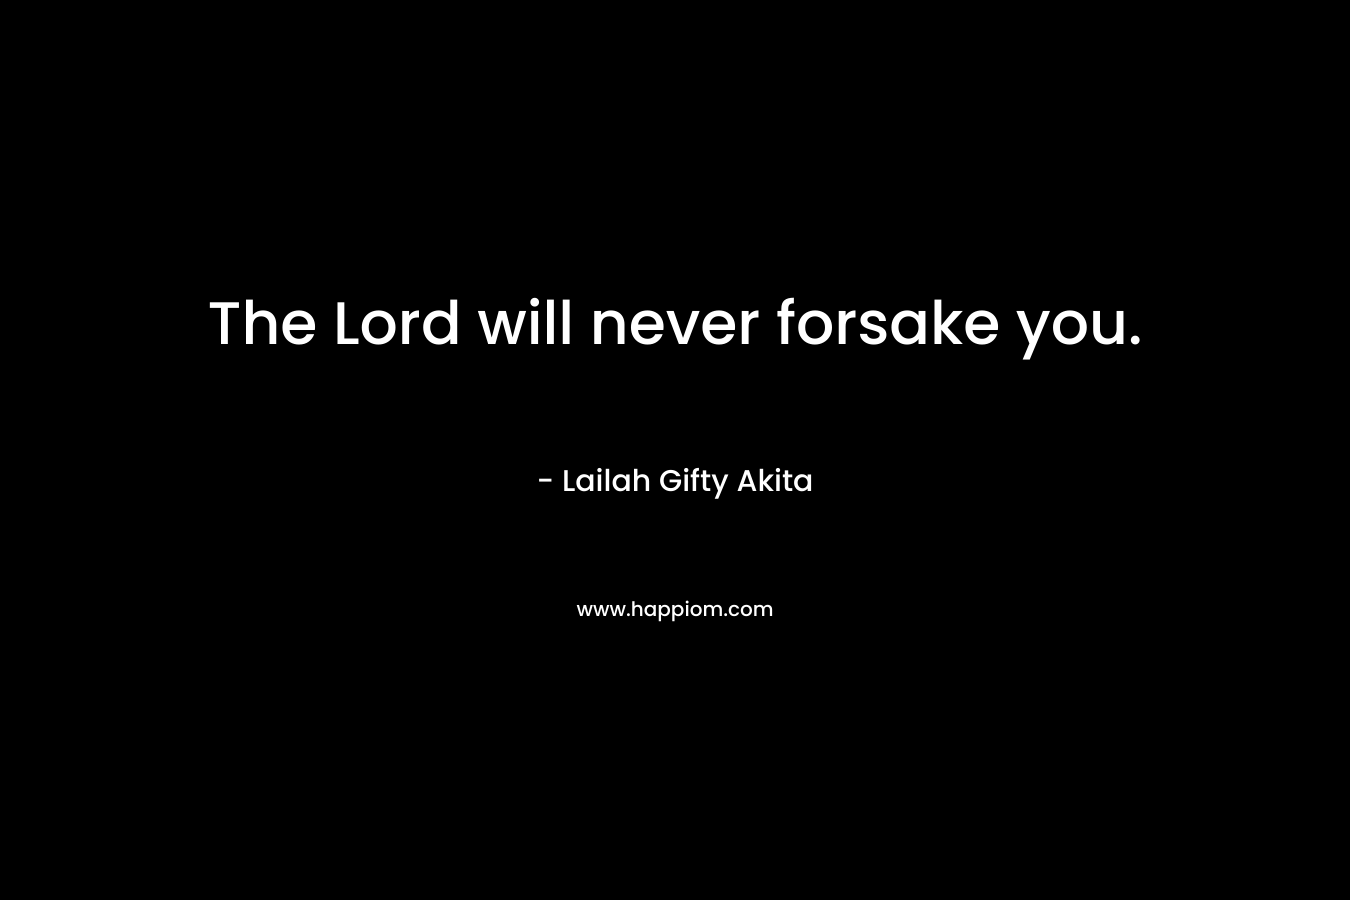 The Lord will never forsake you.